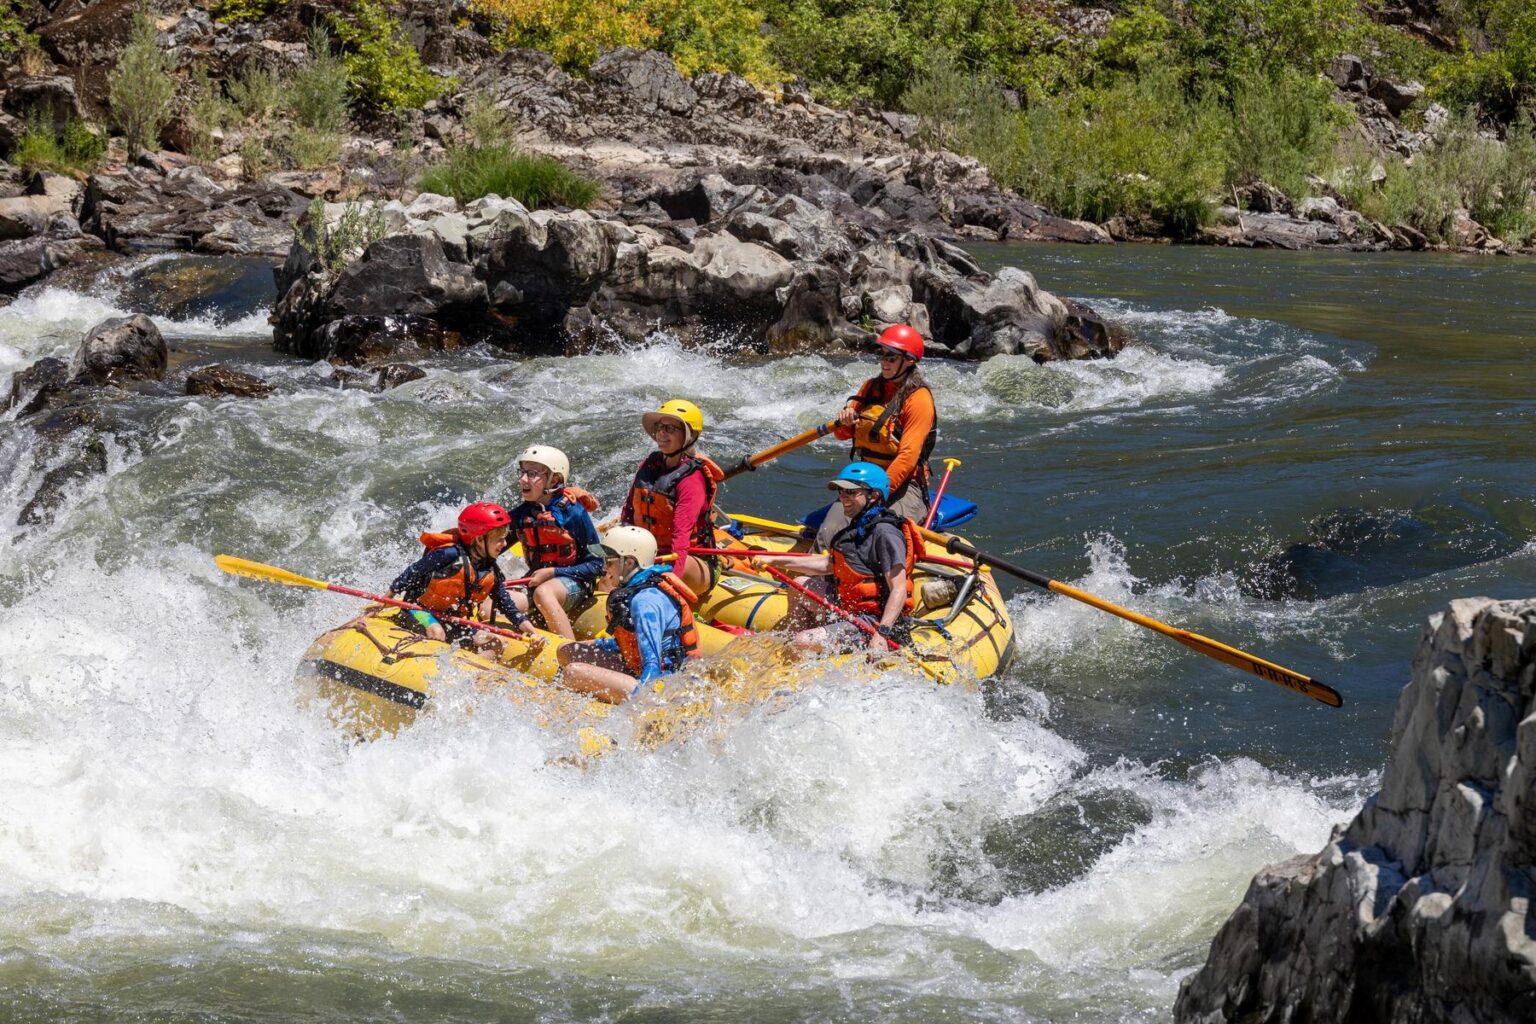 A guide rows an oar-assisted paddle raft through a splashy rapid on Oregon's Rogue River.